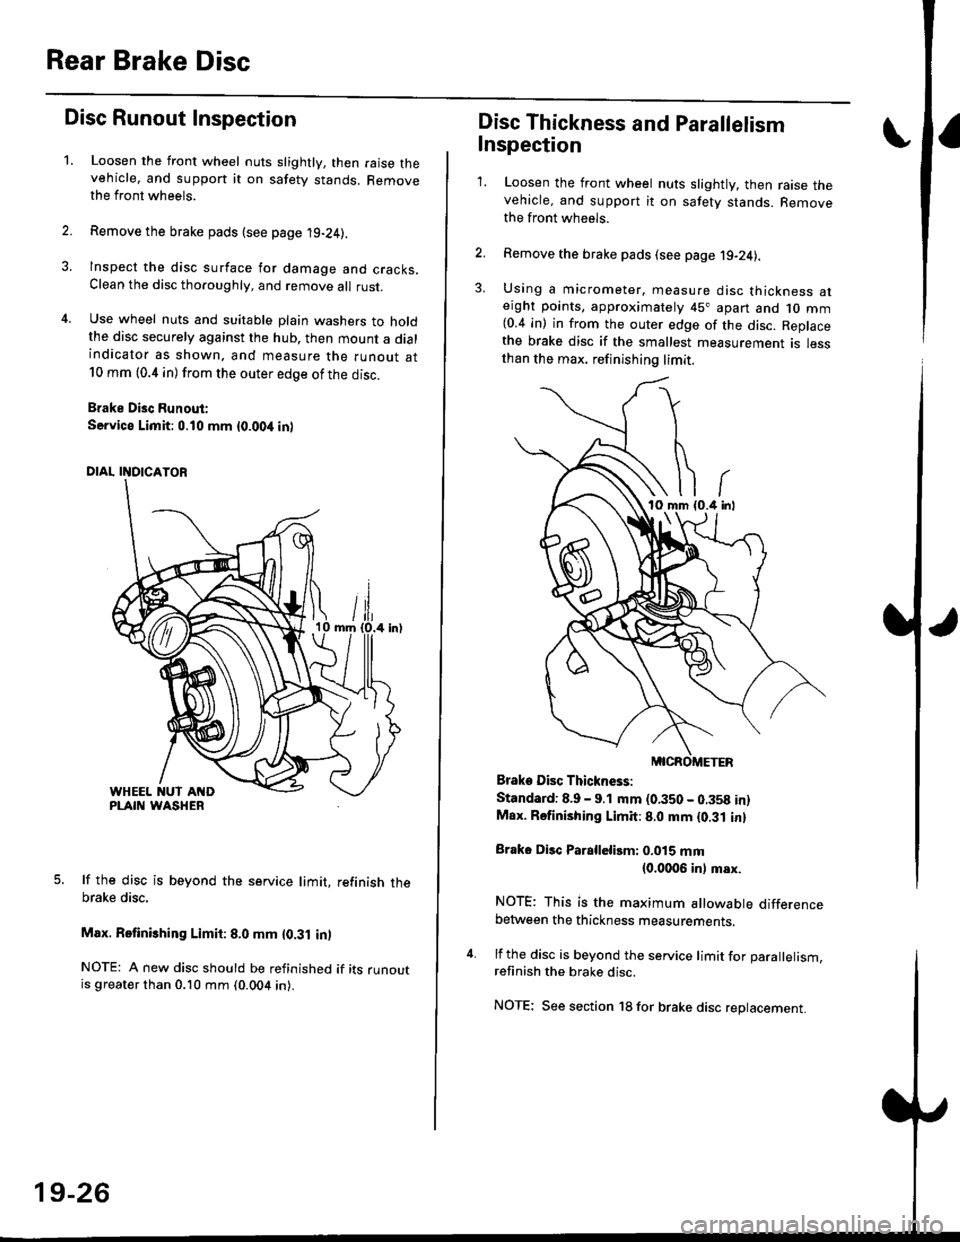 HONDA CIVIC 2000 6.G Workshop Manual Rear Brake Disc
Disc Runout Inspection
1.Loosen the front wheel nuts slightly, then raise thevehicle, and suppon it on safety stands. Removethe front wheels.
Remove the brake pads (see page 19-24).
In